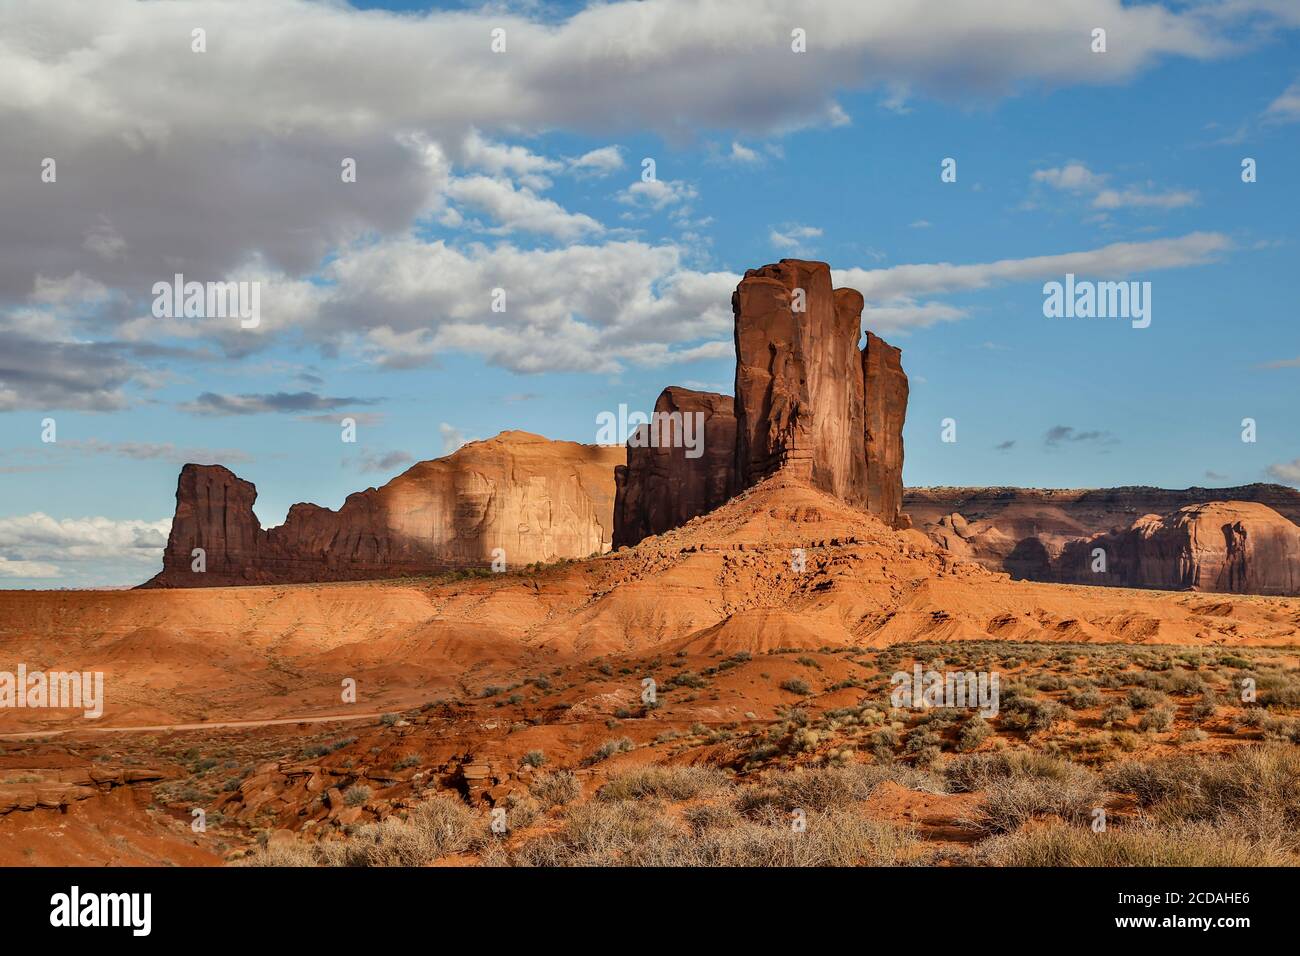 Camel Butte from John Ford's Point Overlook, Monument Valley, Utah and Arizona border USA Stock Photo